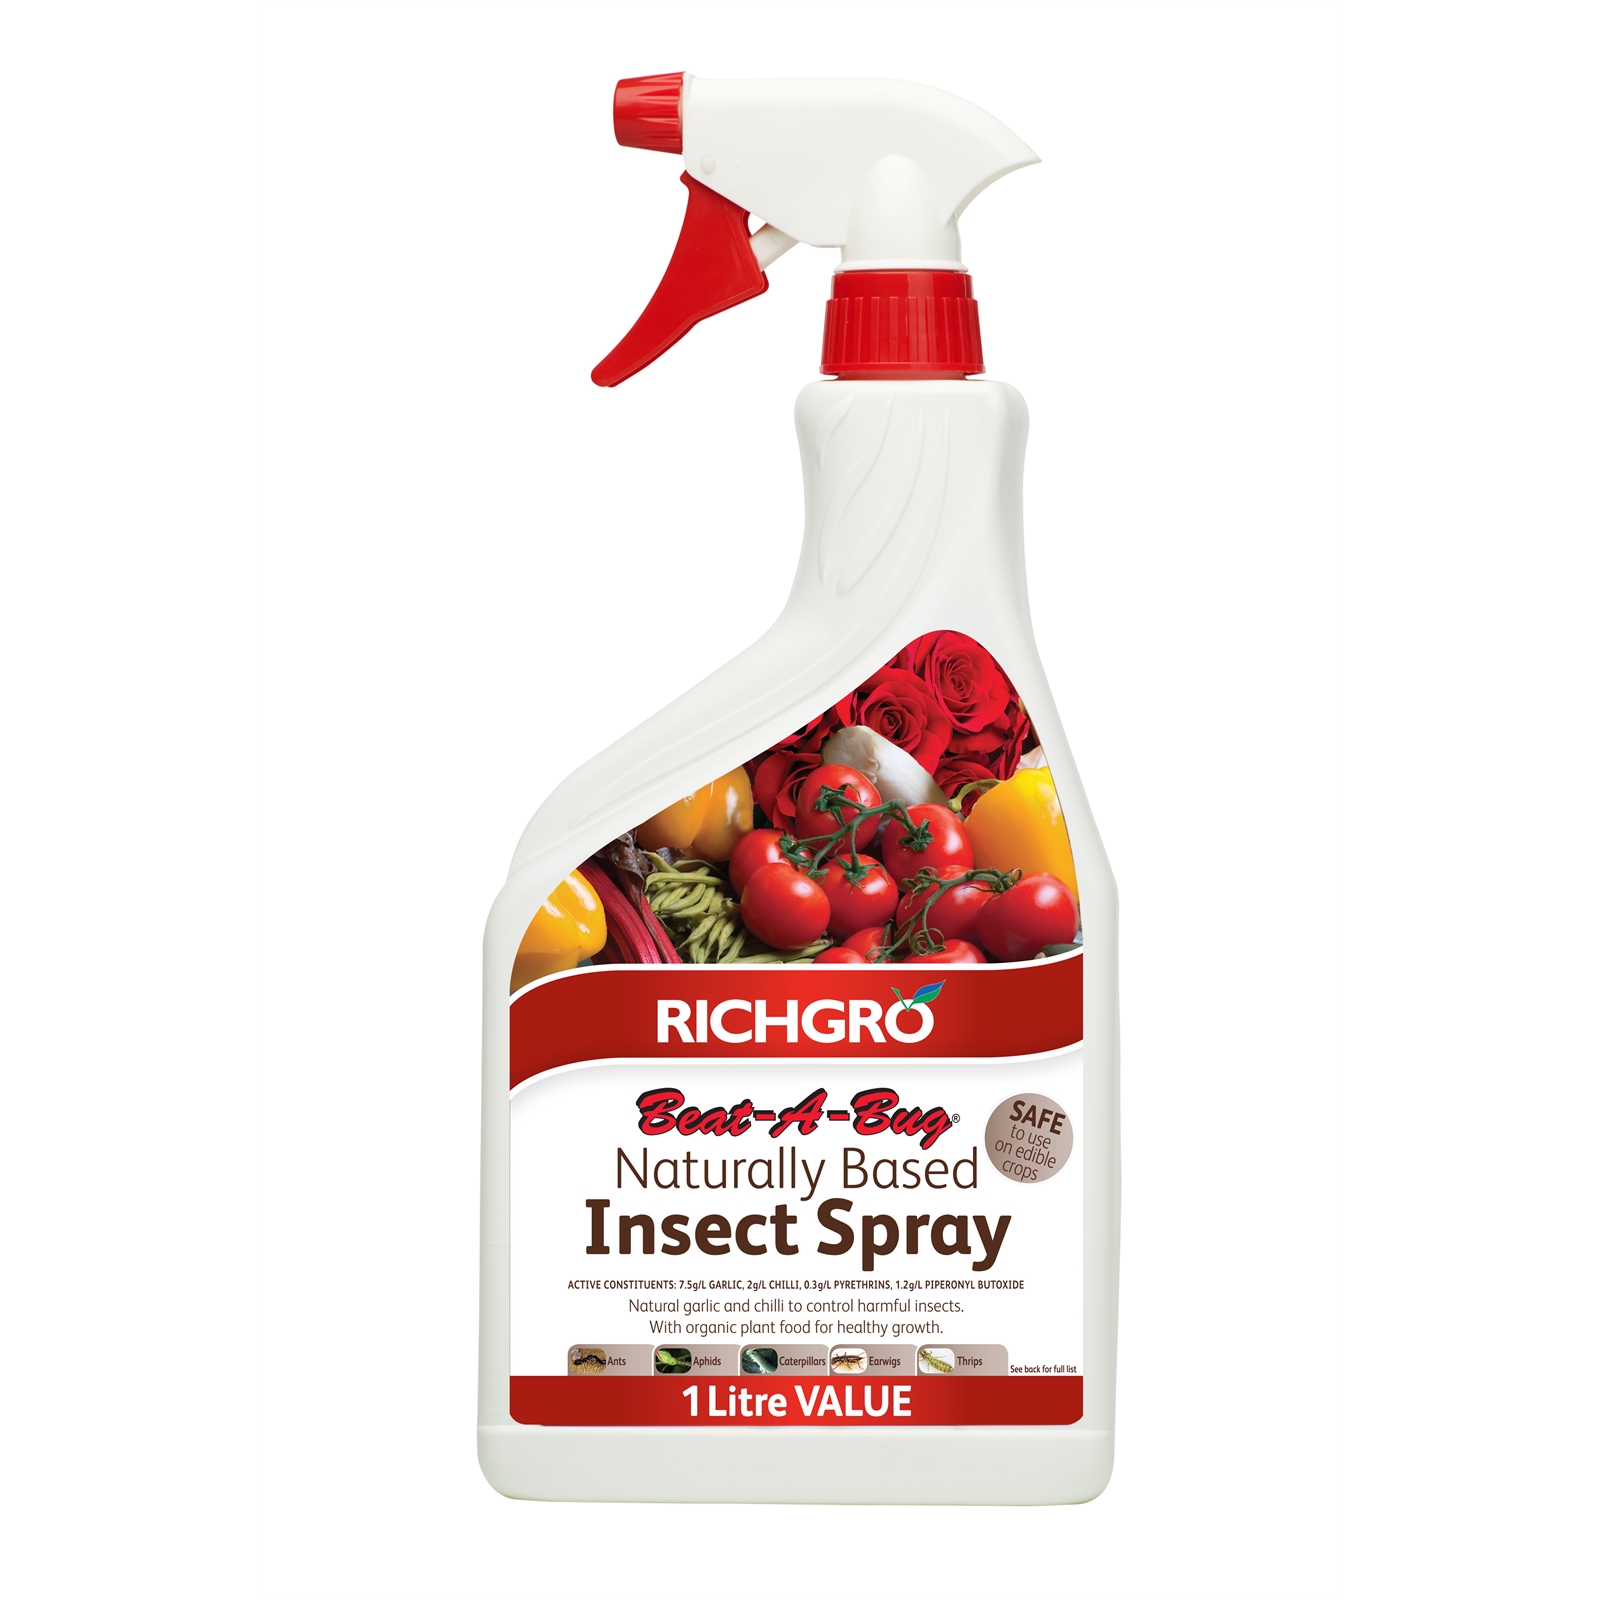 Richgro 1L Beat-A-Bug Naturally Based Insect Spray